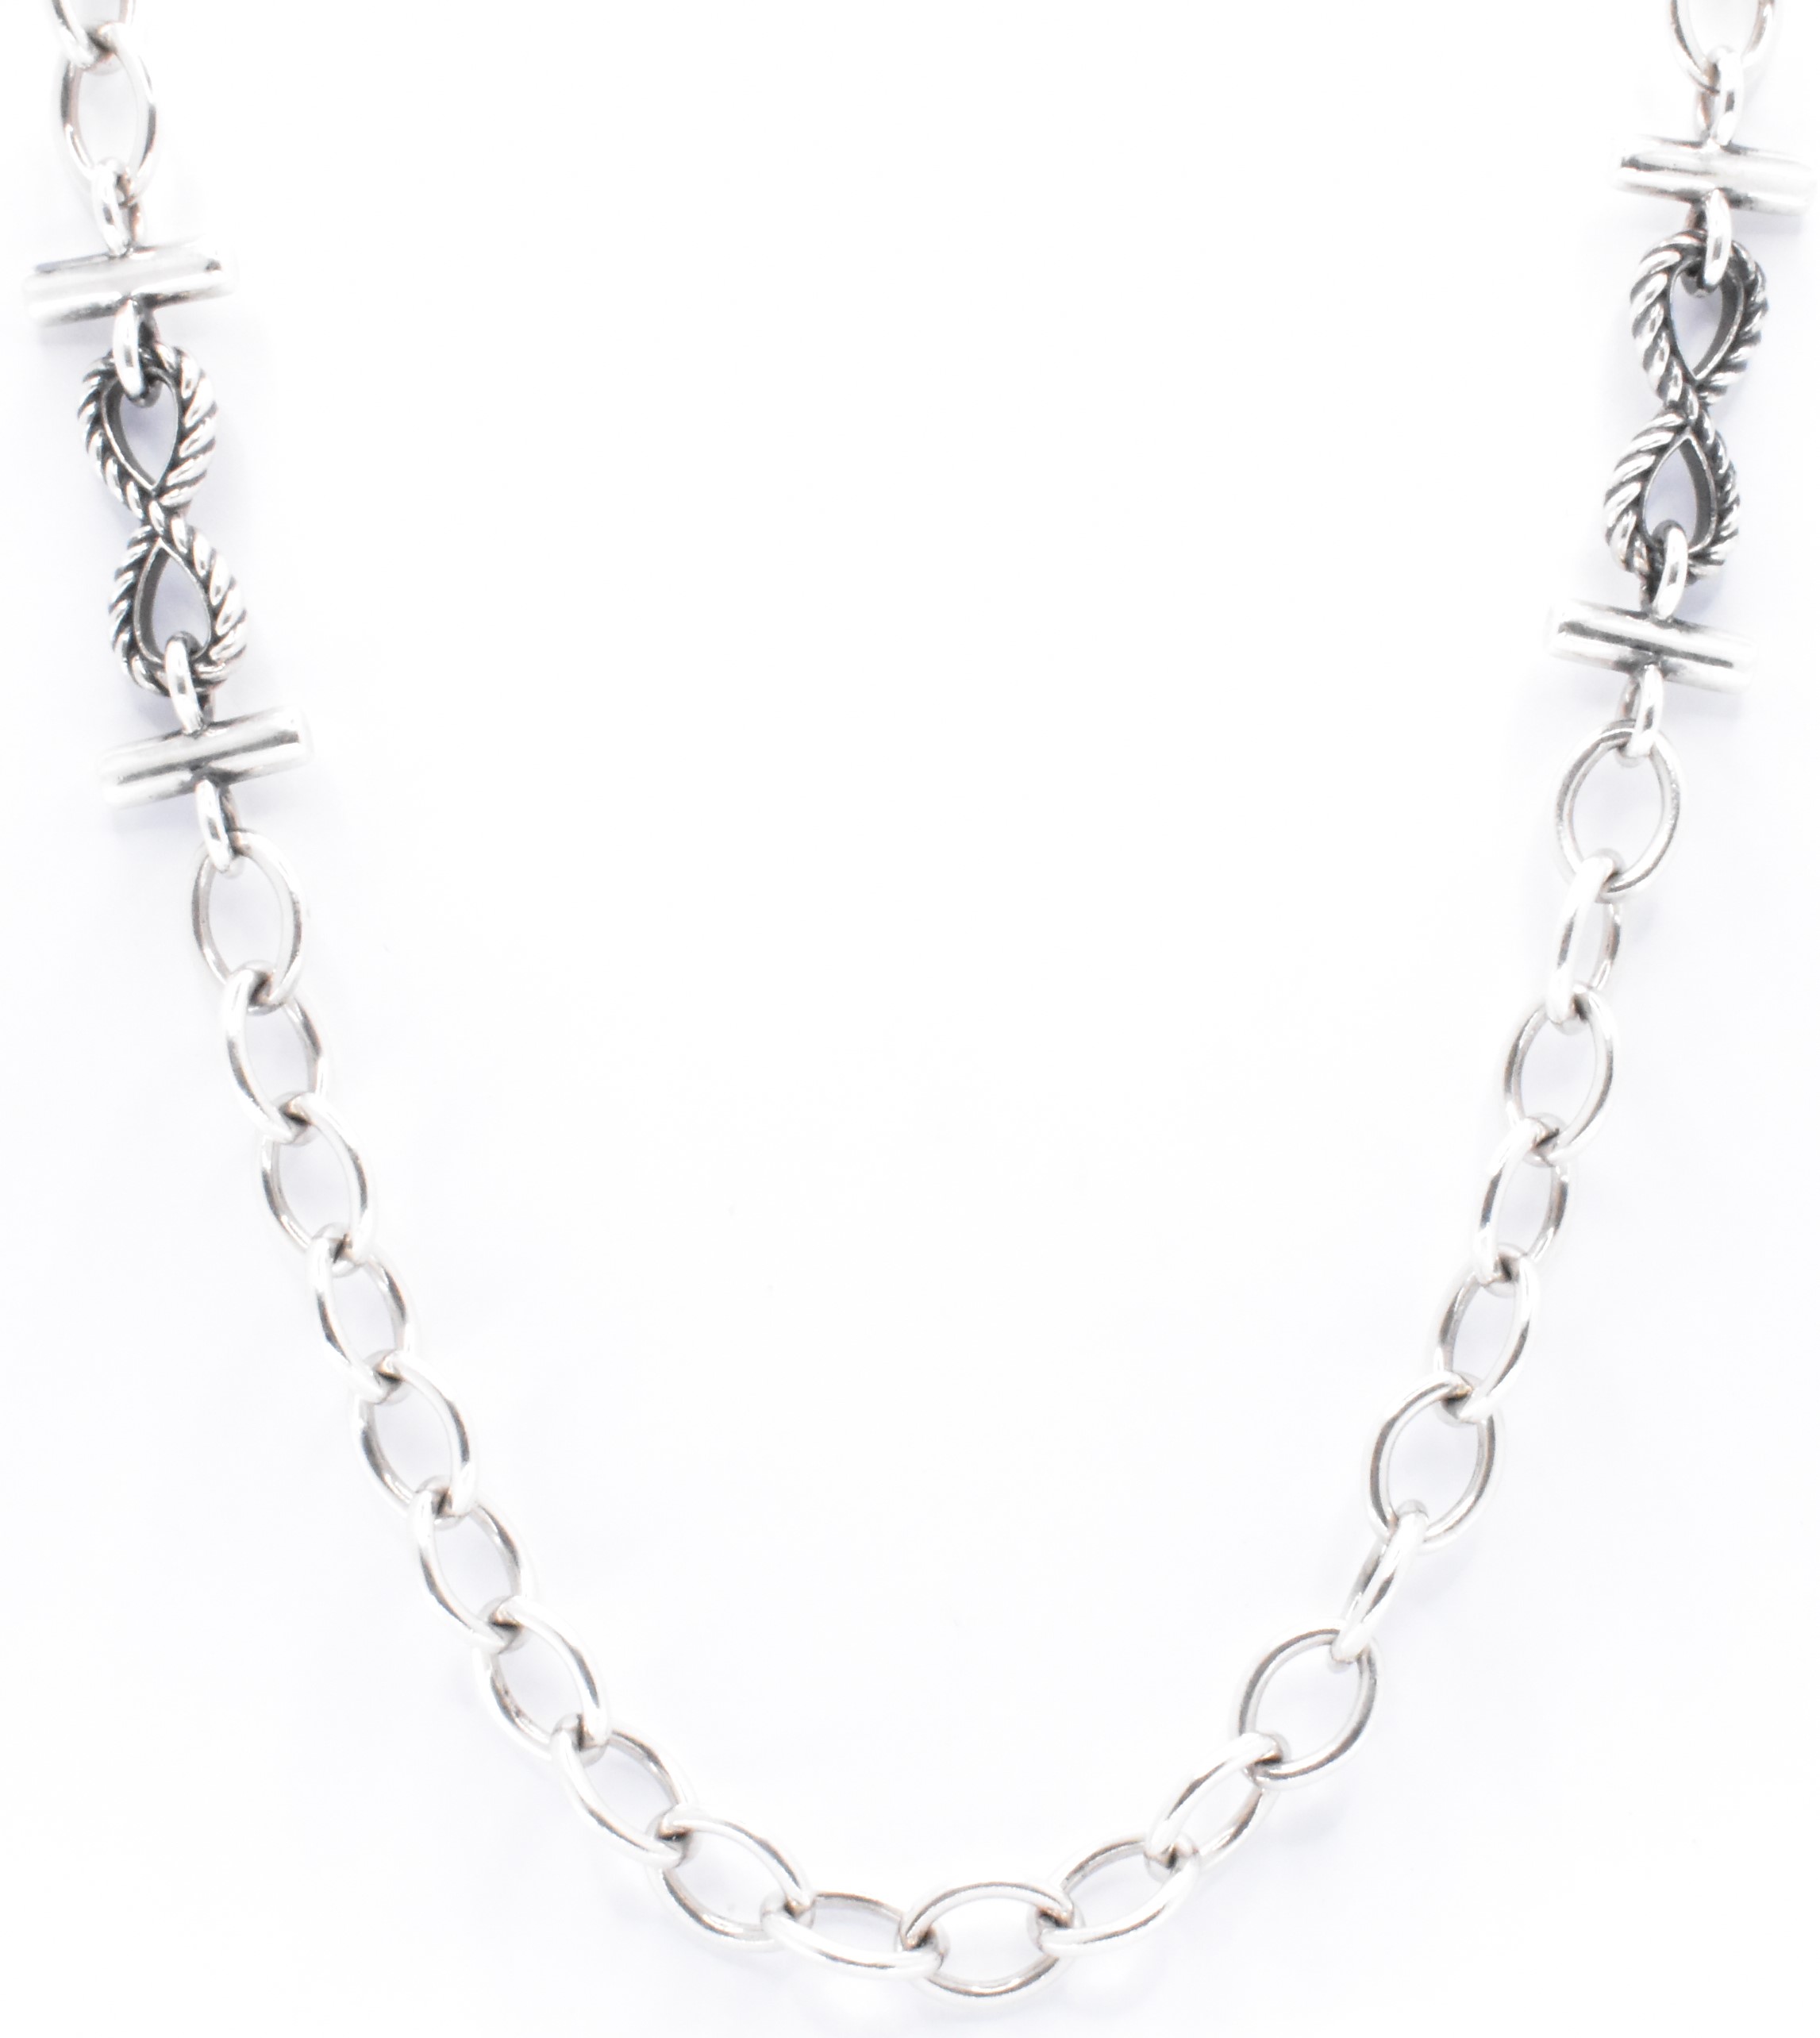 SHAUN LEANE HALLMARKED SILVER NECKLACE CHAIN - Image 3 of 3